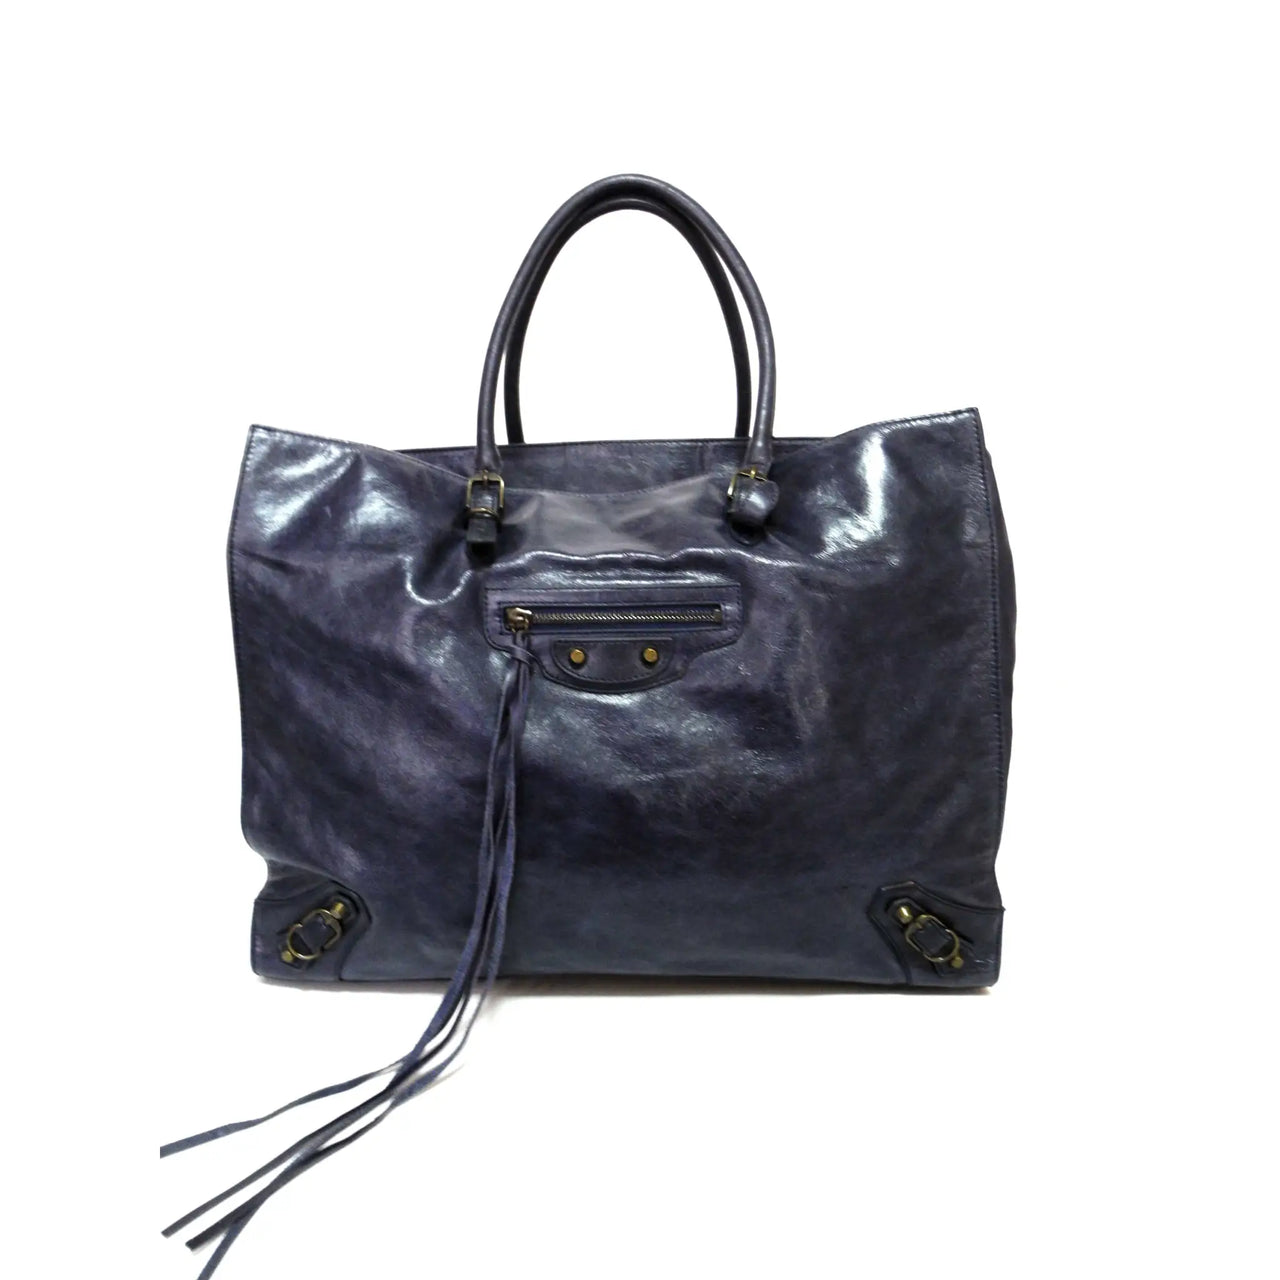 The Balenciaga Le Cagole is the hottest bag right now according to Lyst